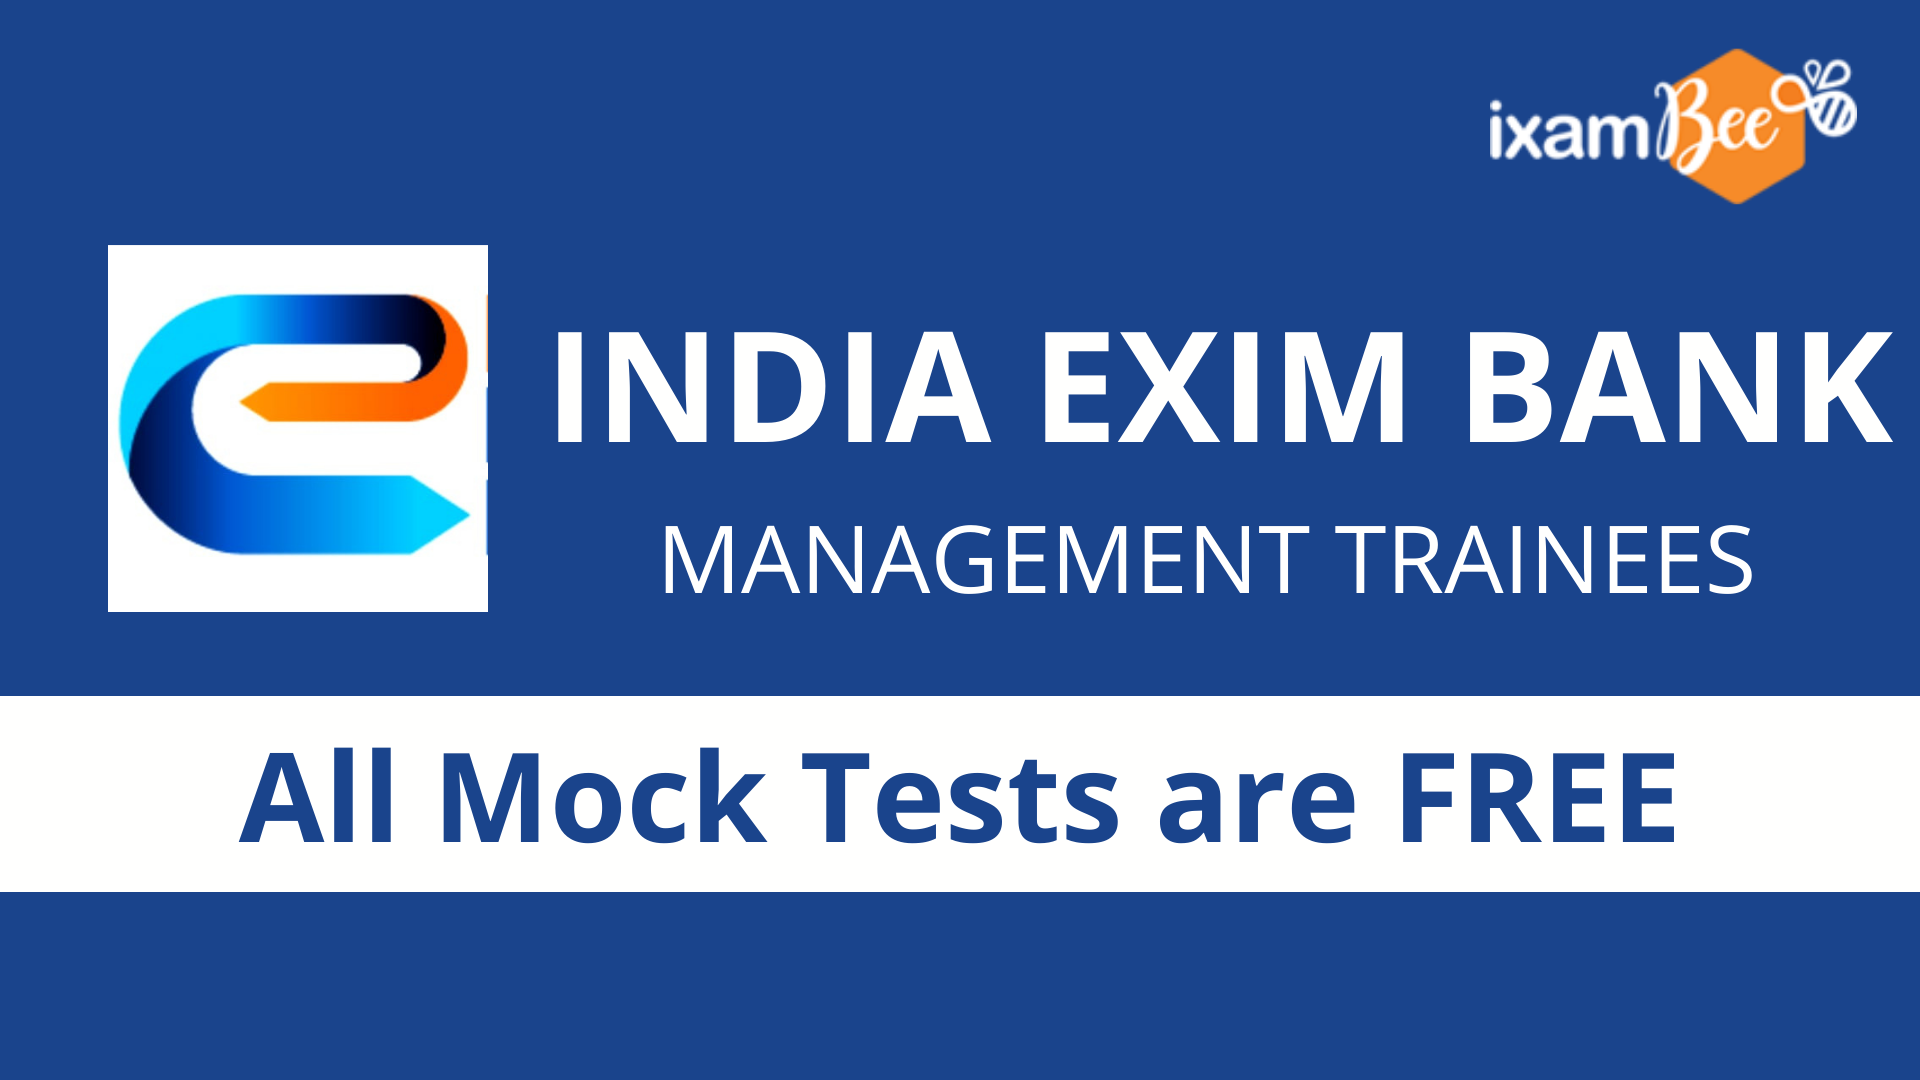 India Exim Bank Management Trainee Free Mock Tests